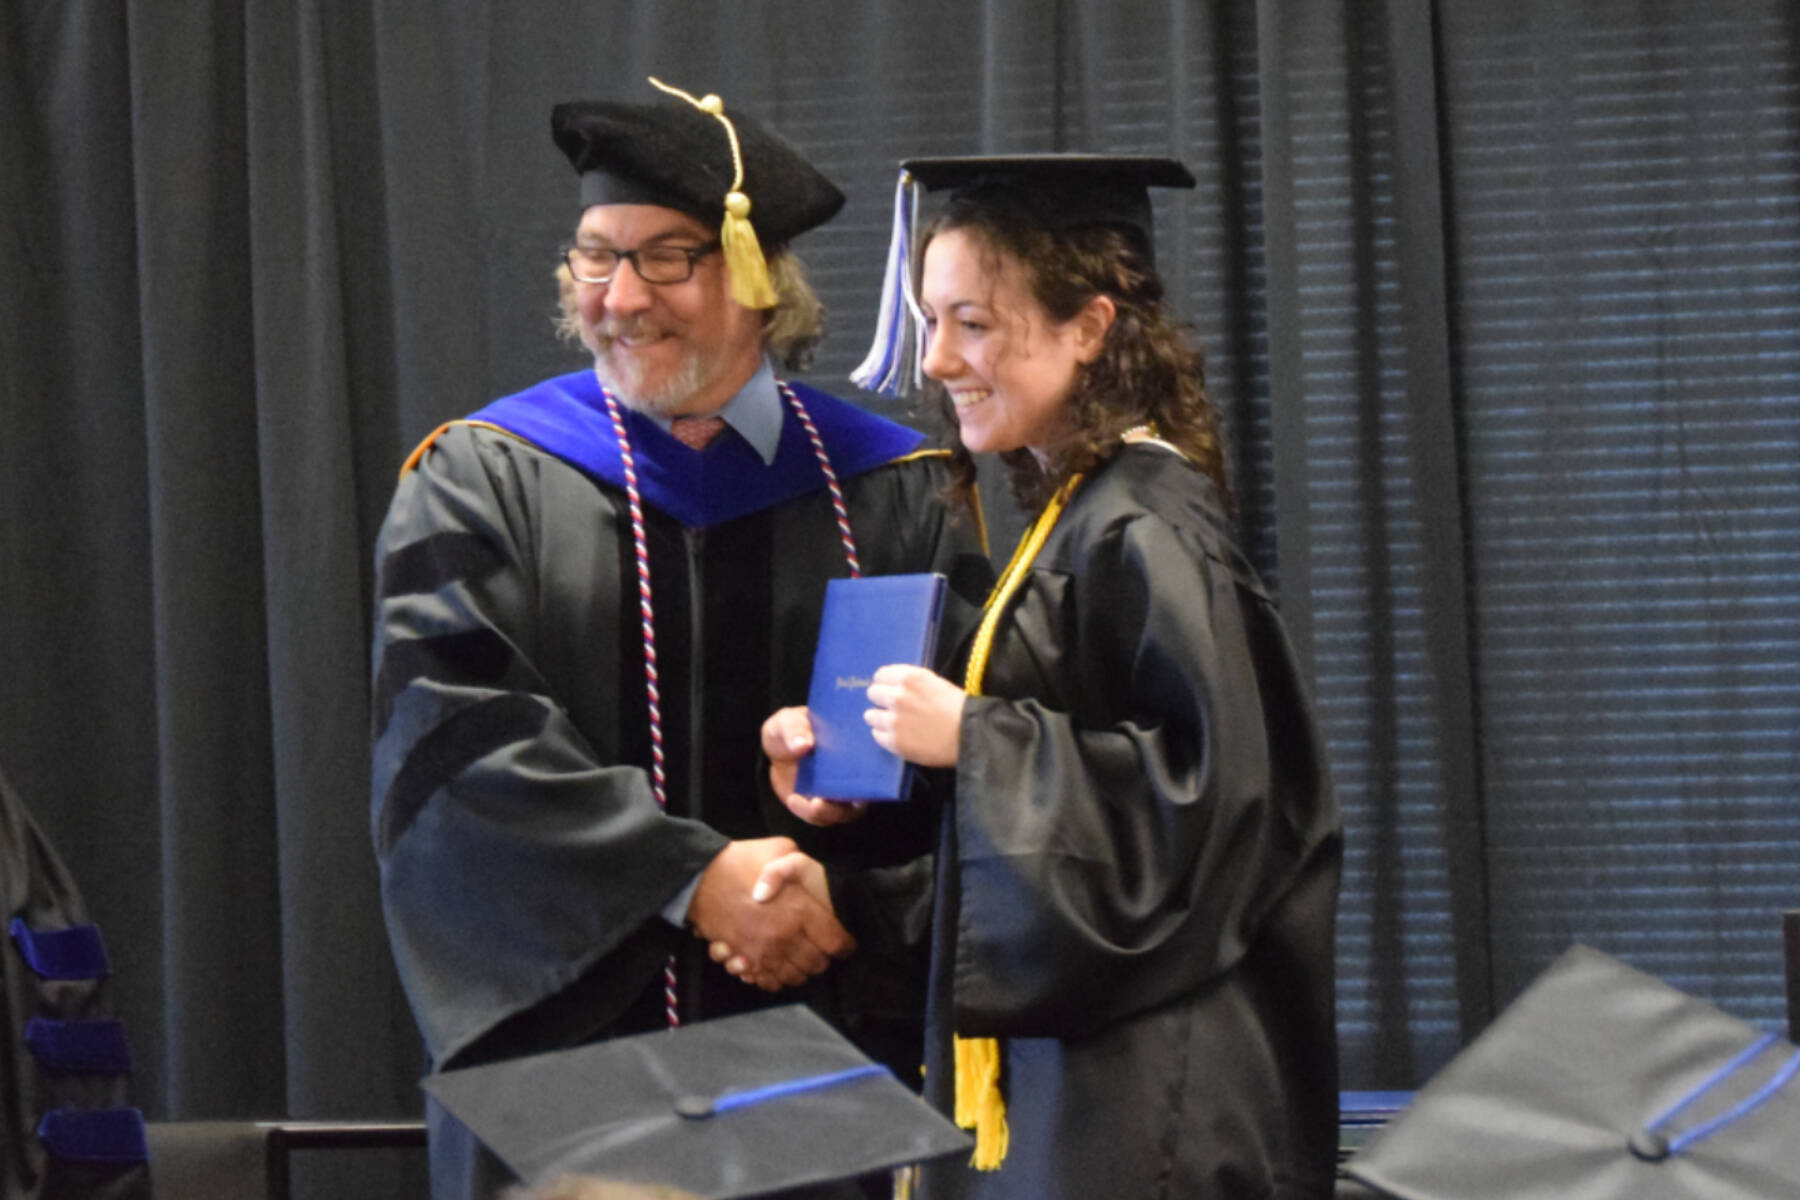 Kachemak Bay Campus Director Dr. Reid Brewer (left) presents valedictorian Elizabeth Rozeboom (right) with her Associate of Arts diploma during the 2023 KBC Commencement on Wednesday, May 10, 2023 in 猫咪视频r, 猫咪视频.